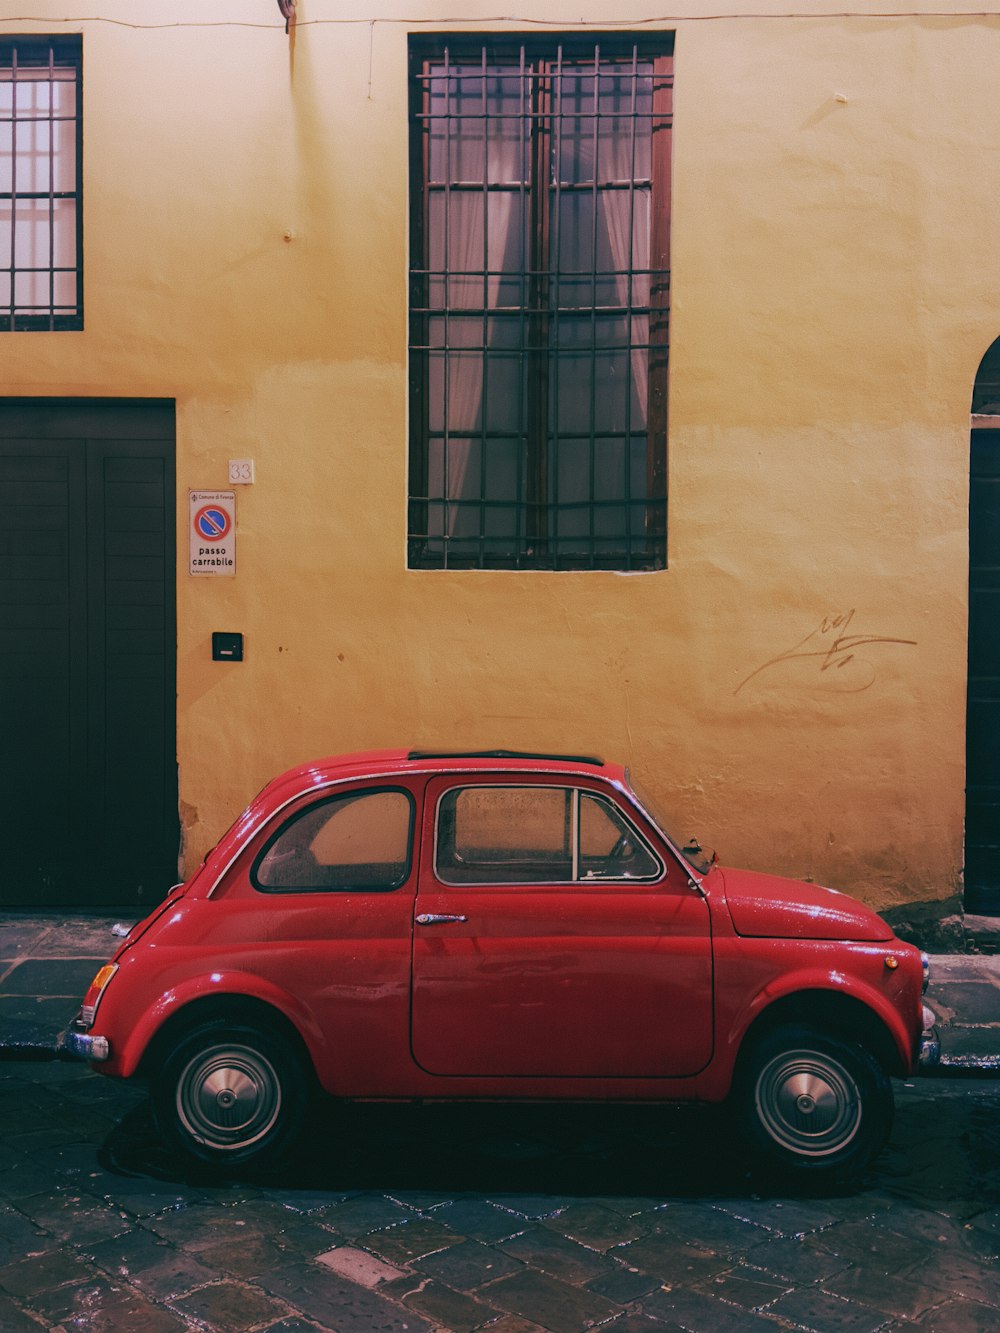 a red car parked in front of a yellow building